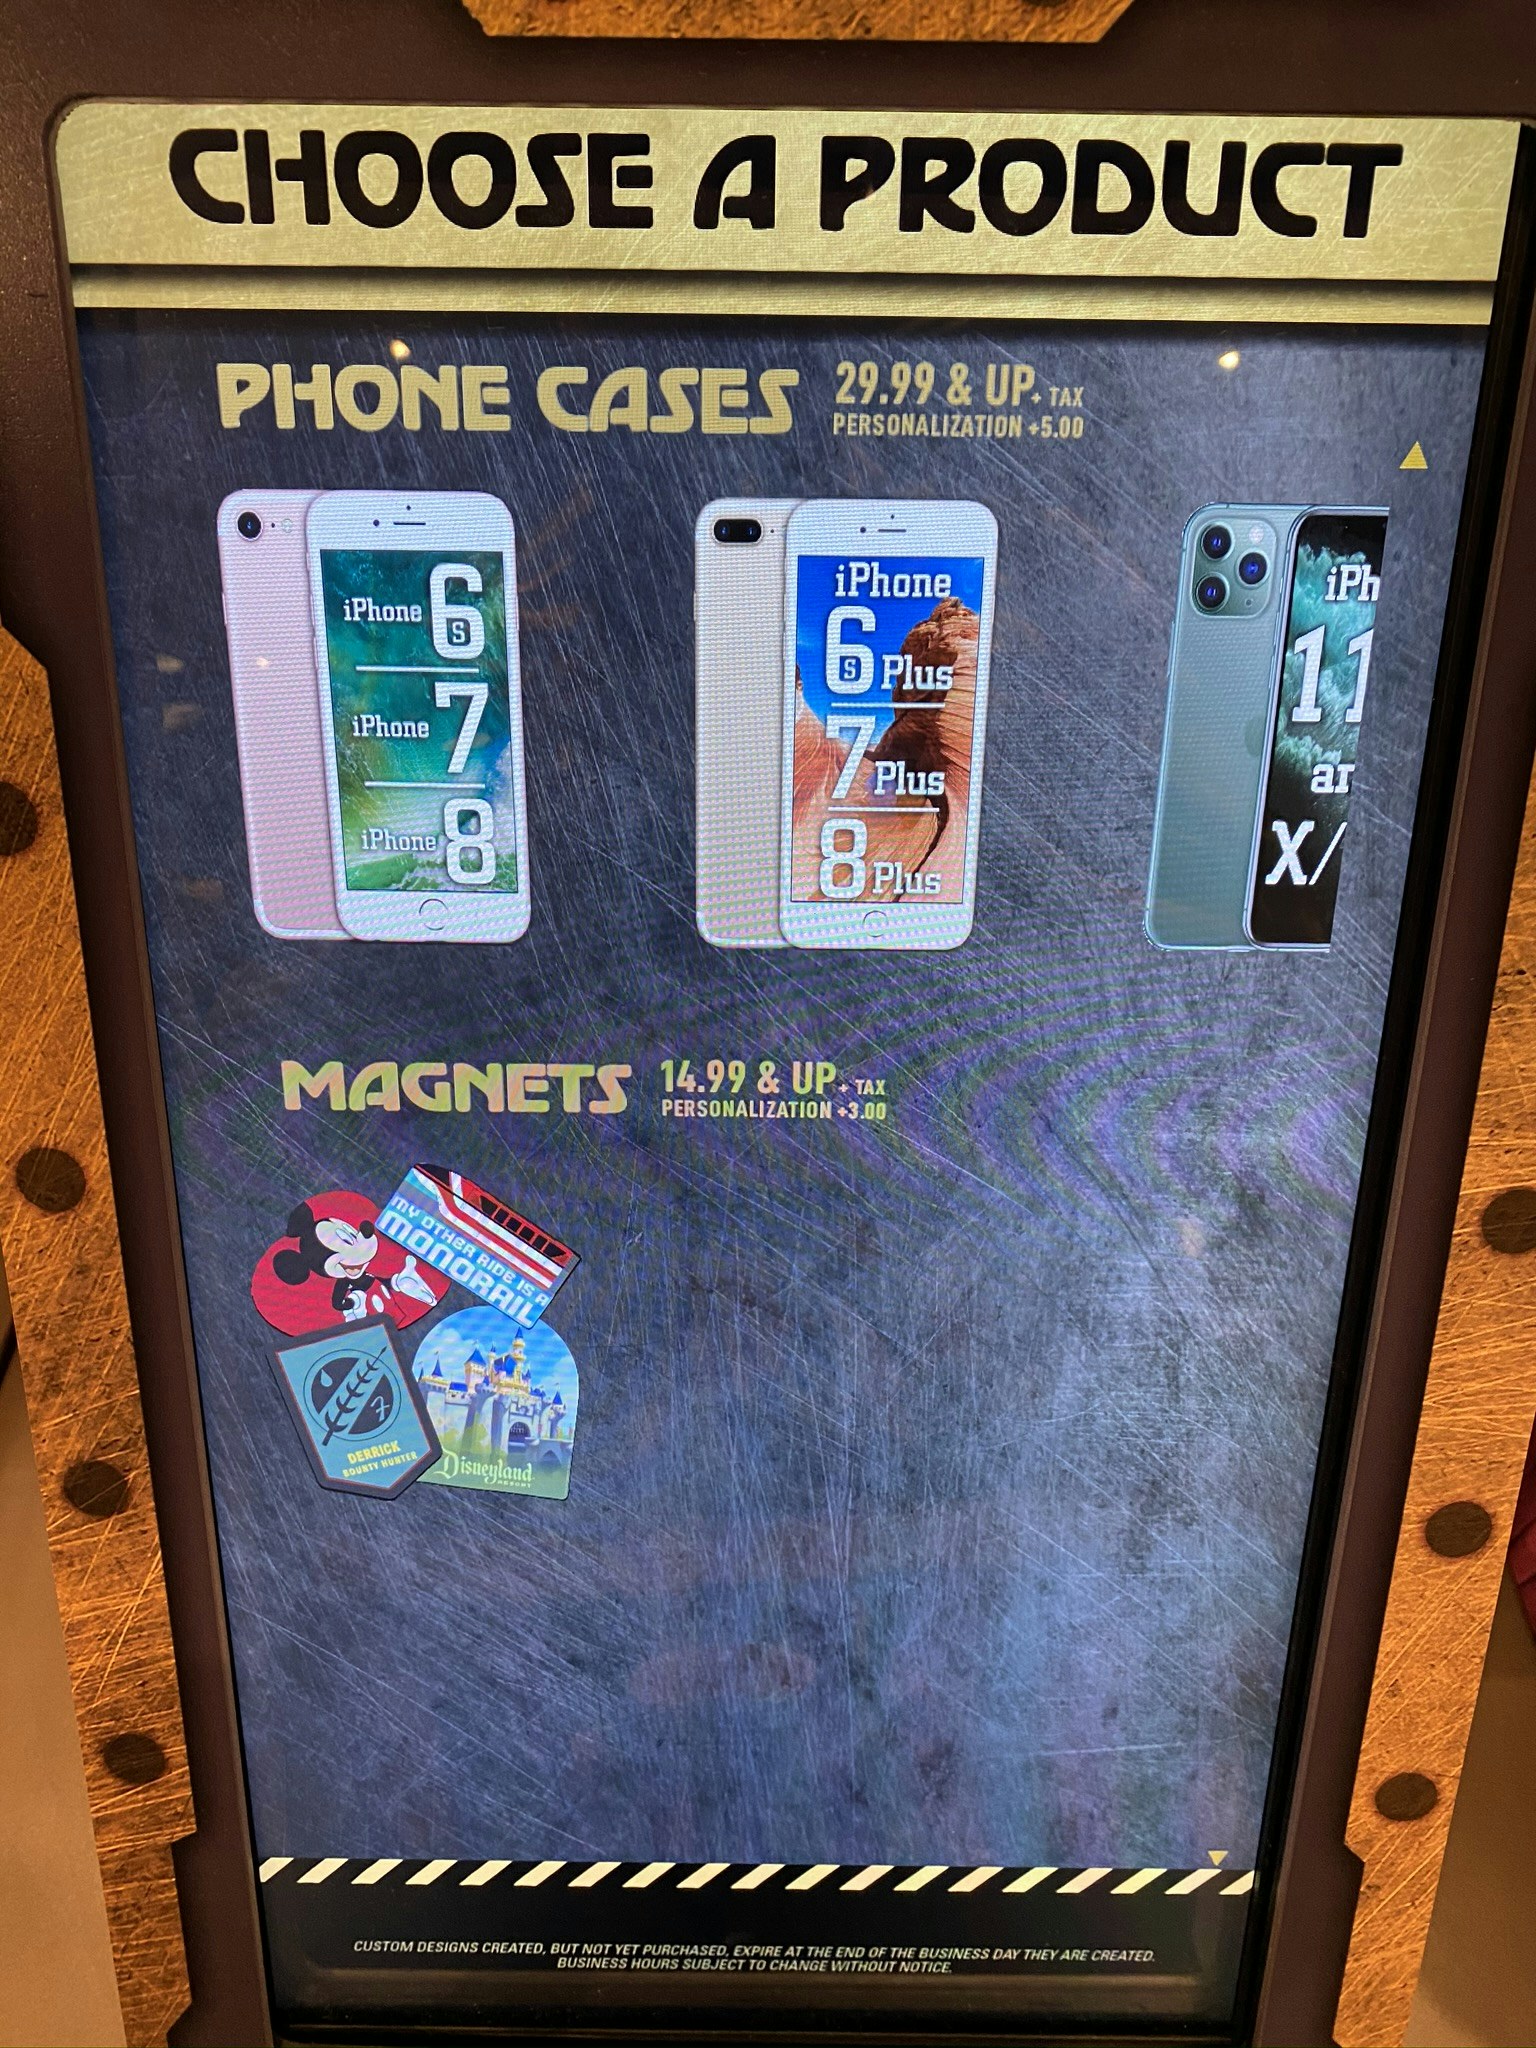 New MaDe Design Kiosk is Acquired at The Collector's Warehouse in Disney California Adventure